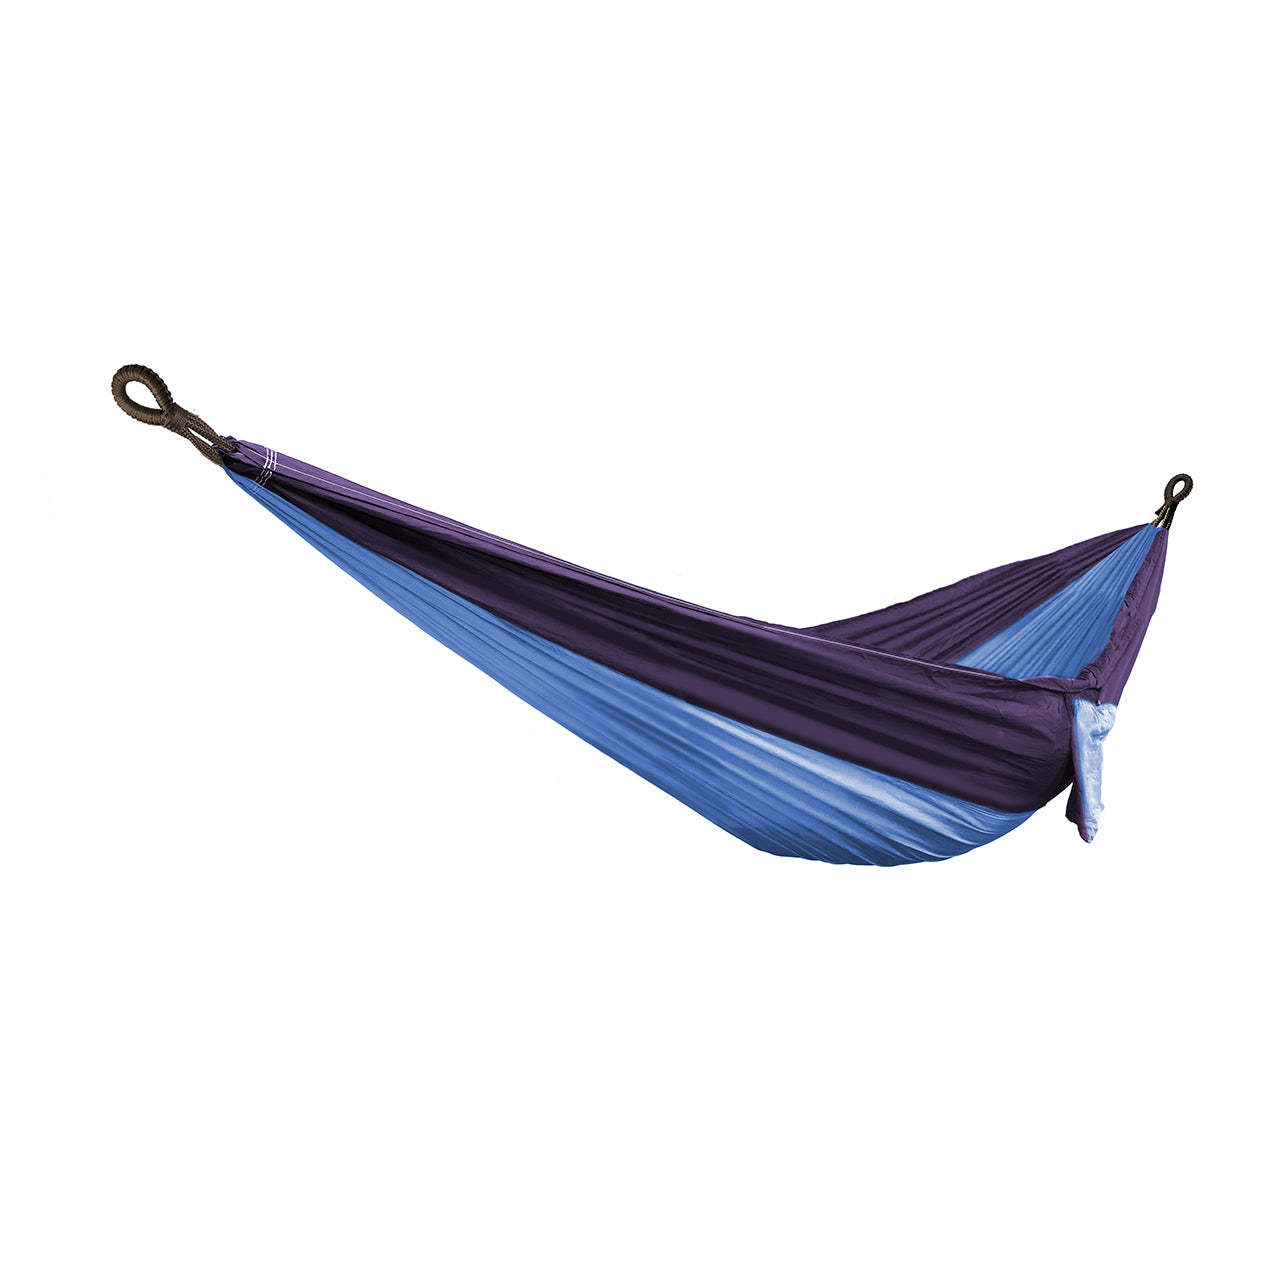 Bliss Hammocks 54-inch Extra Wide To Go Hammock in a Bag with Rip-Stop Stitching and Dual Color Fabric in the royal bliss variation.